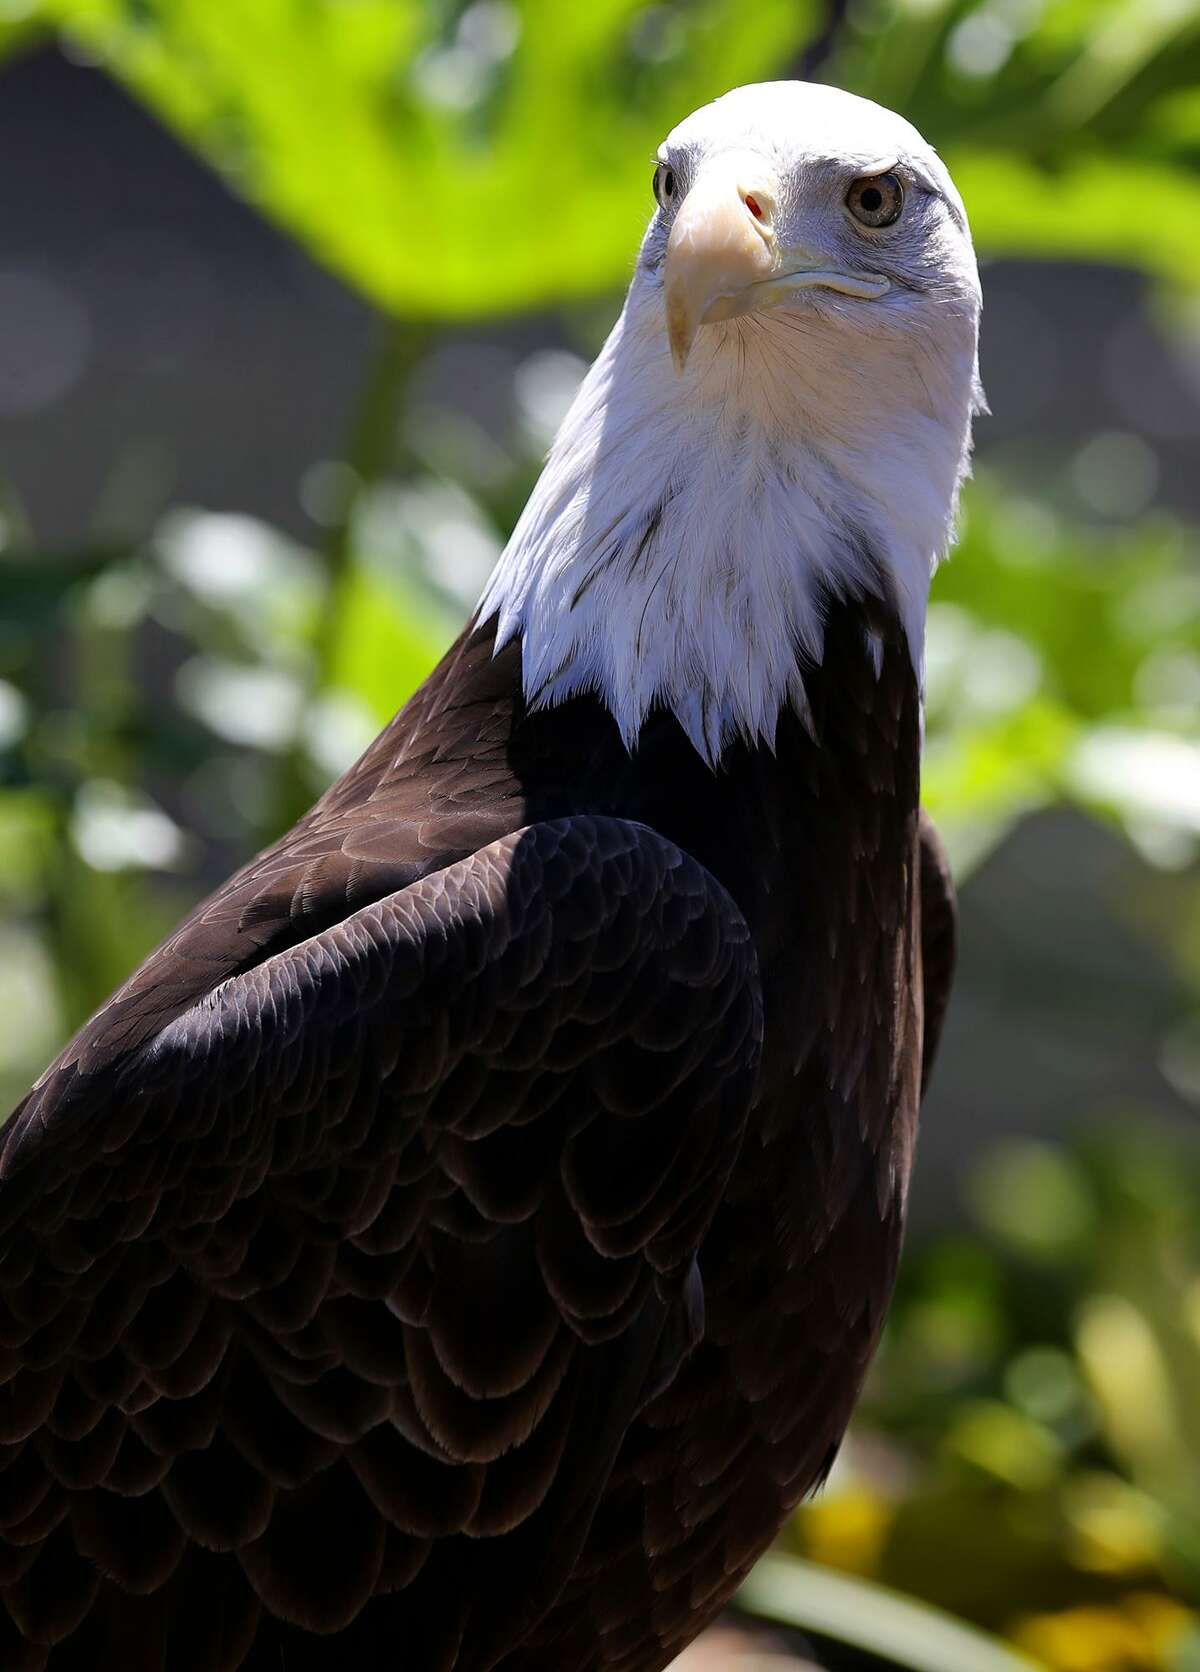 "Haley" the female American bald eagle, a new arrival at the San Antonio Zoo, sits Tuesday March 14, 2017 in her new exhibit space. Haley, who was rescued after being shot in California in 1998, has healed but her wound inhibited her ability to fly, officials said, and she can’t be safely returned to the wild.